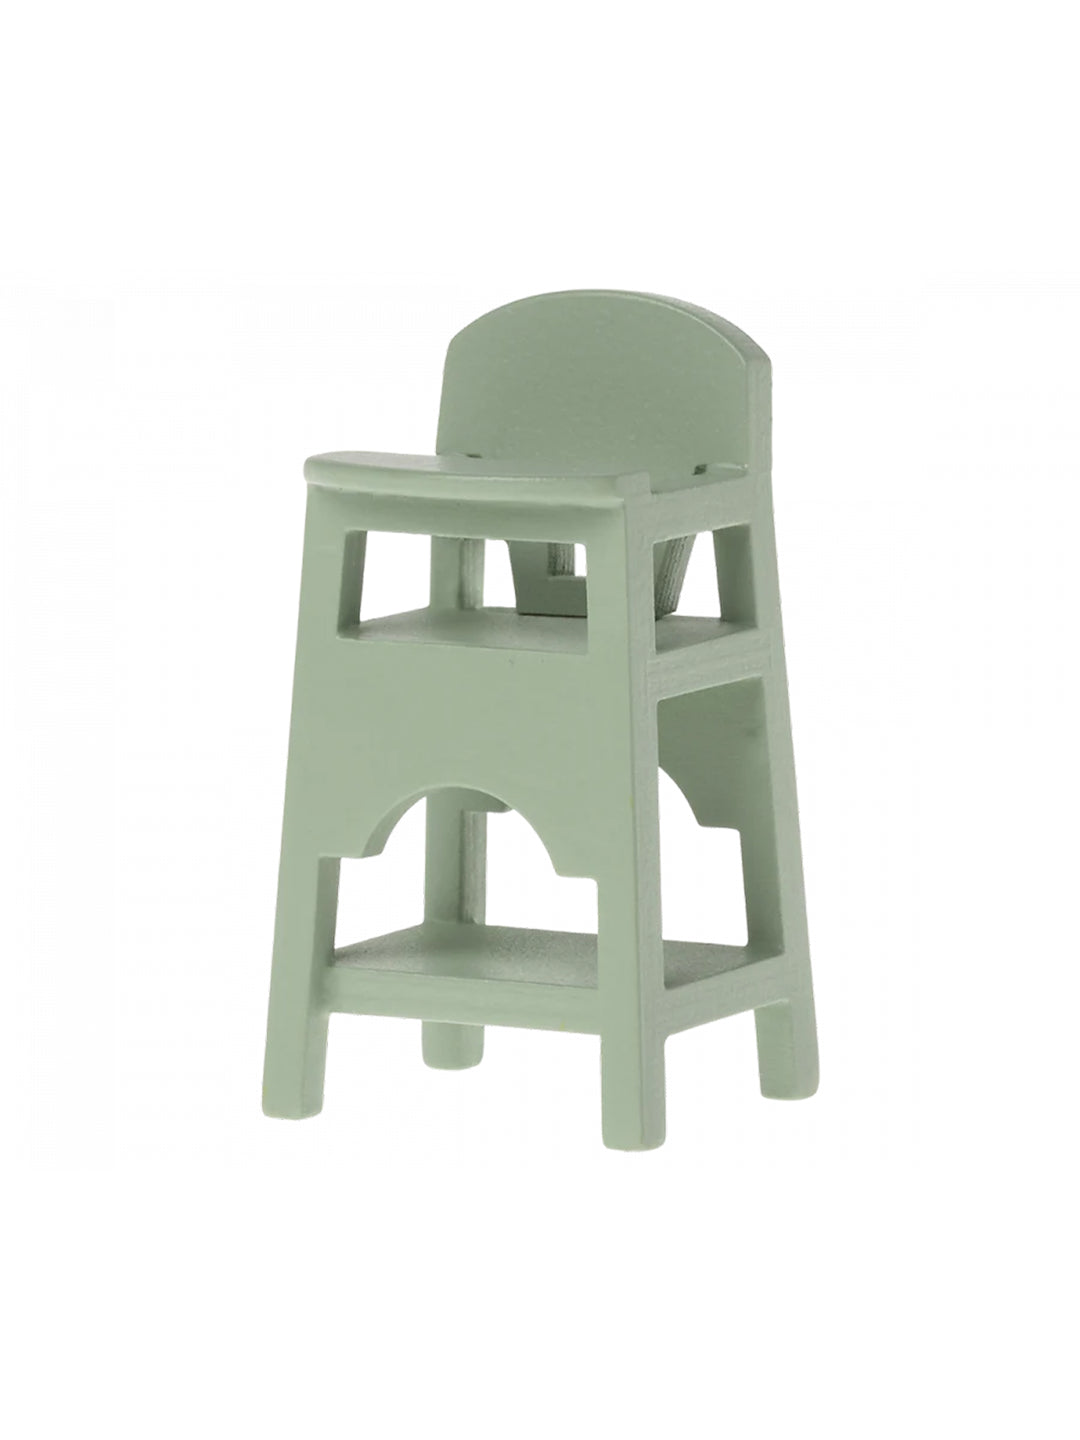 Maileg High Chair, Mouse - Off White